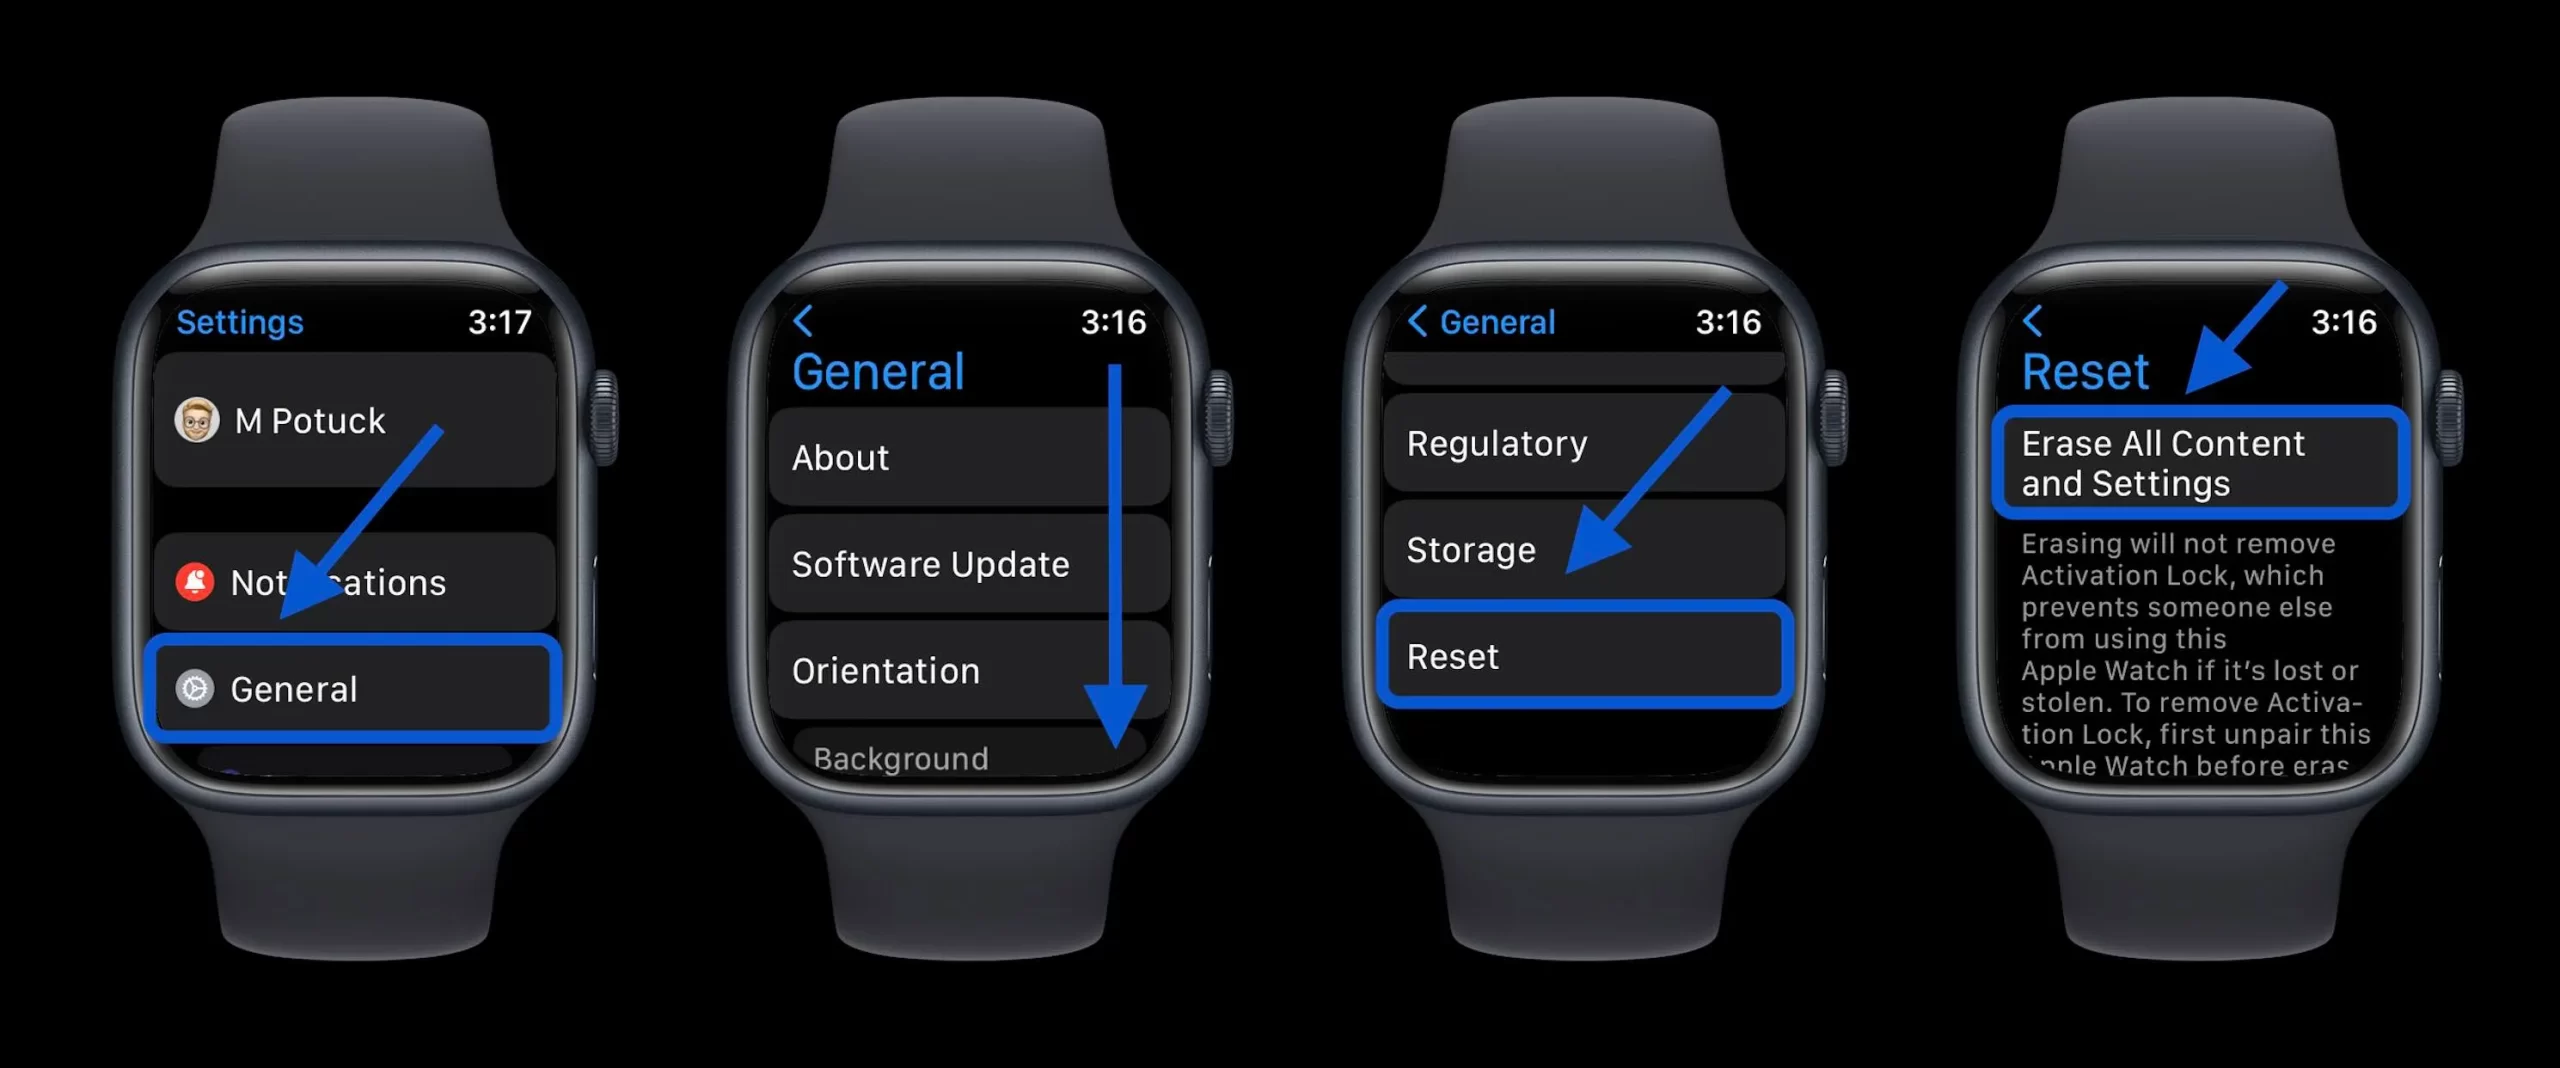 How to Reset Apple Watch to Factory Settings